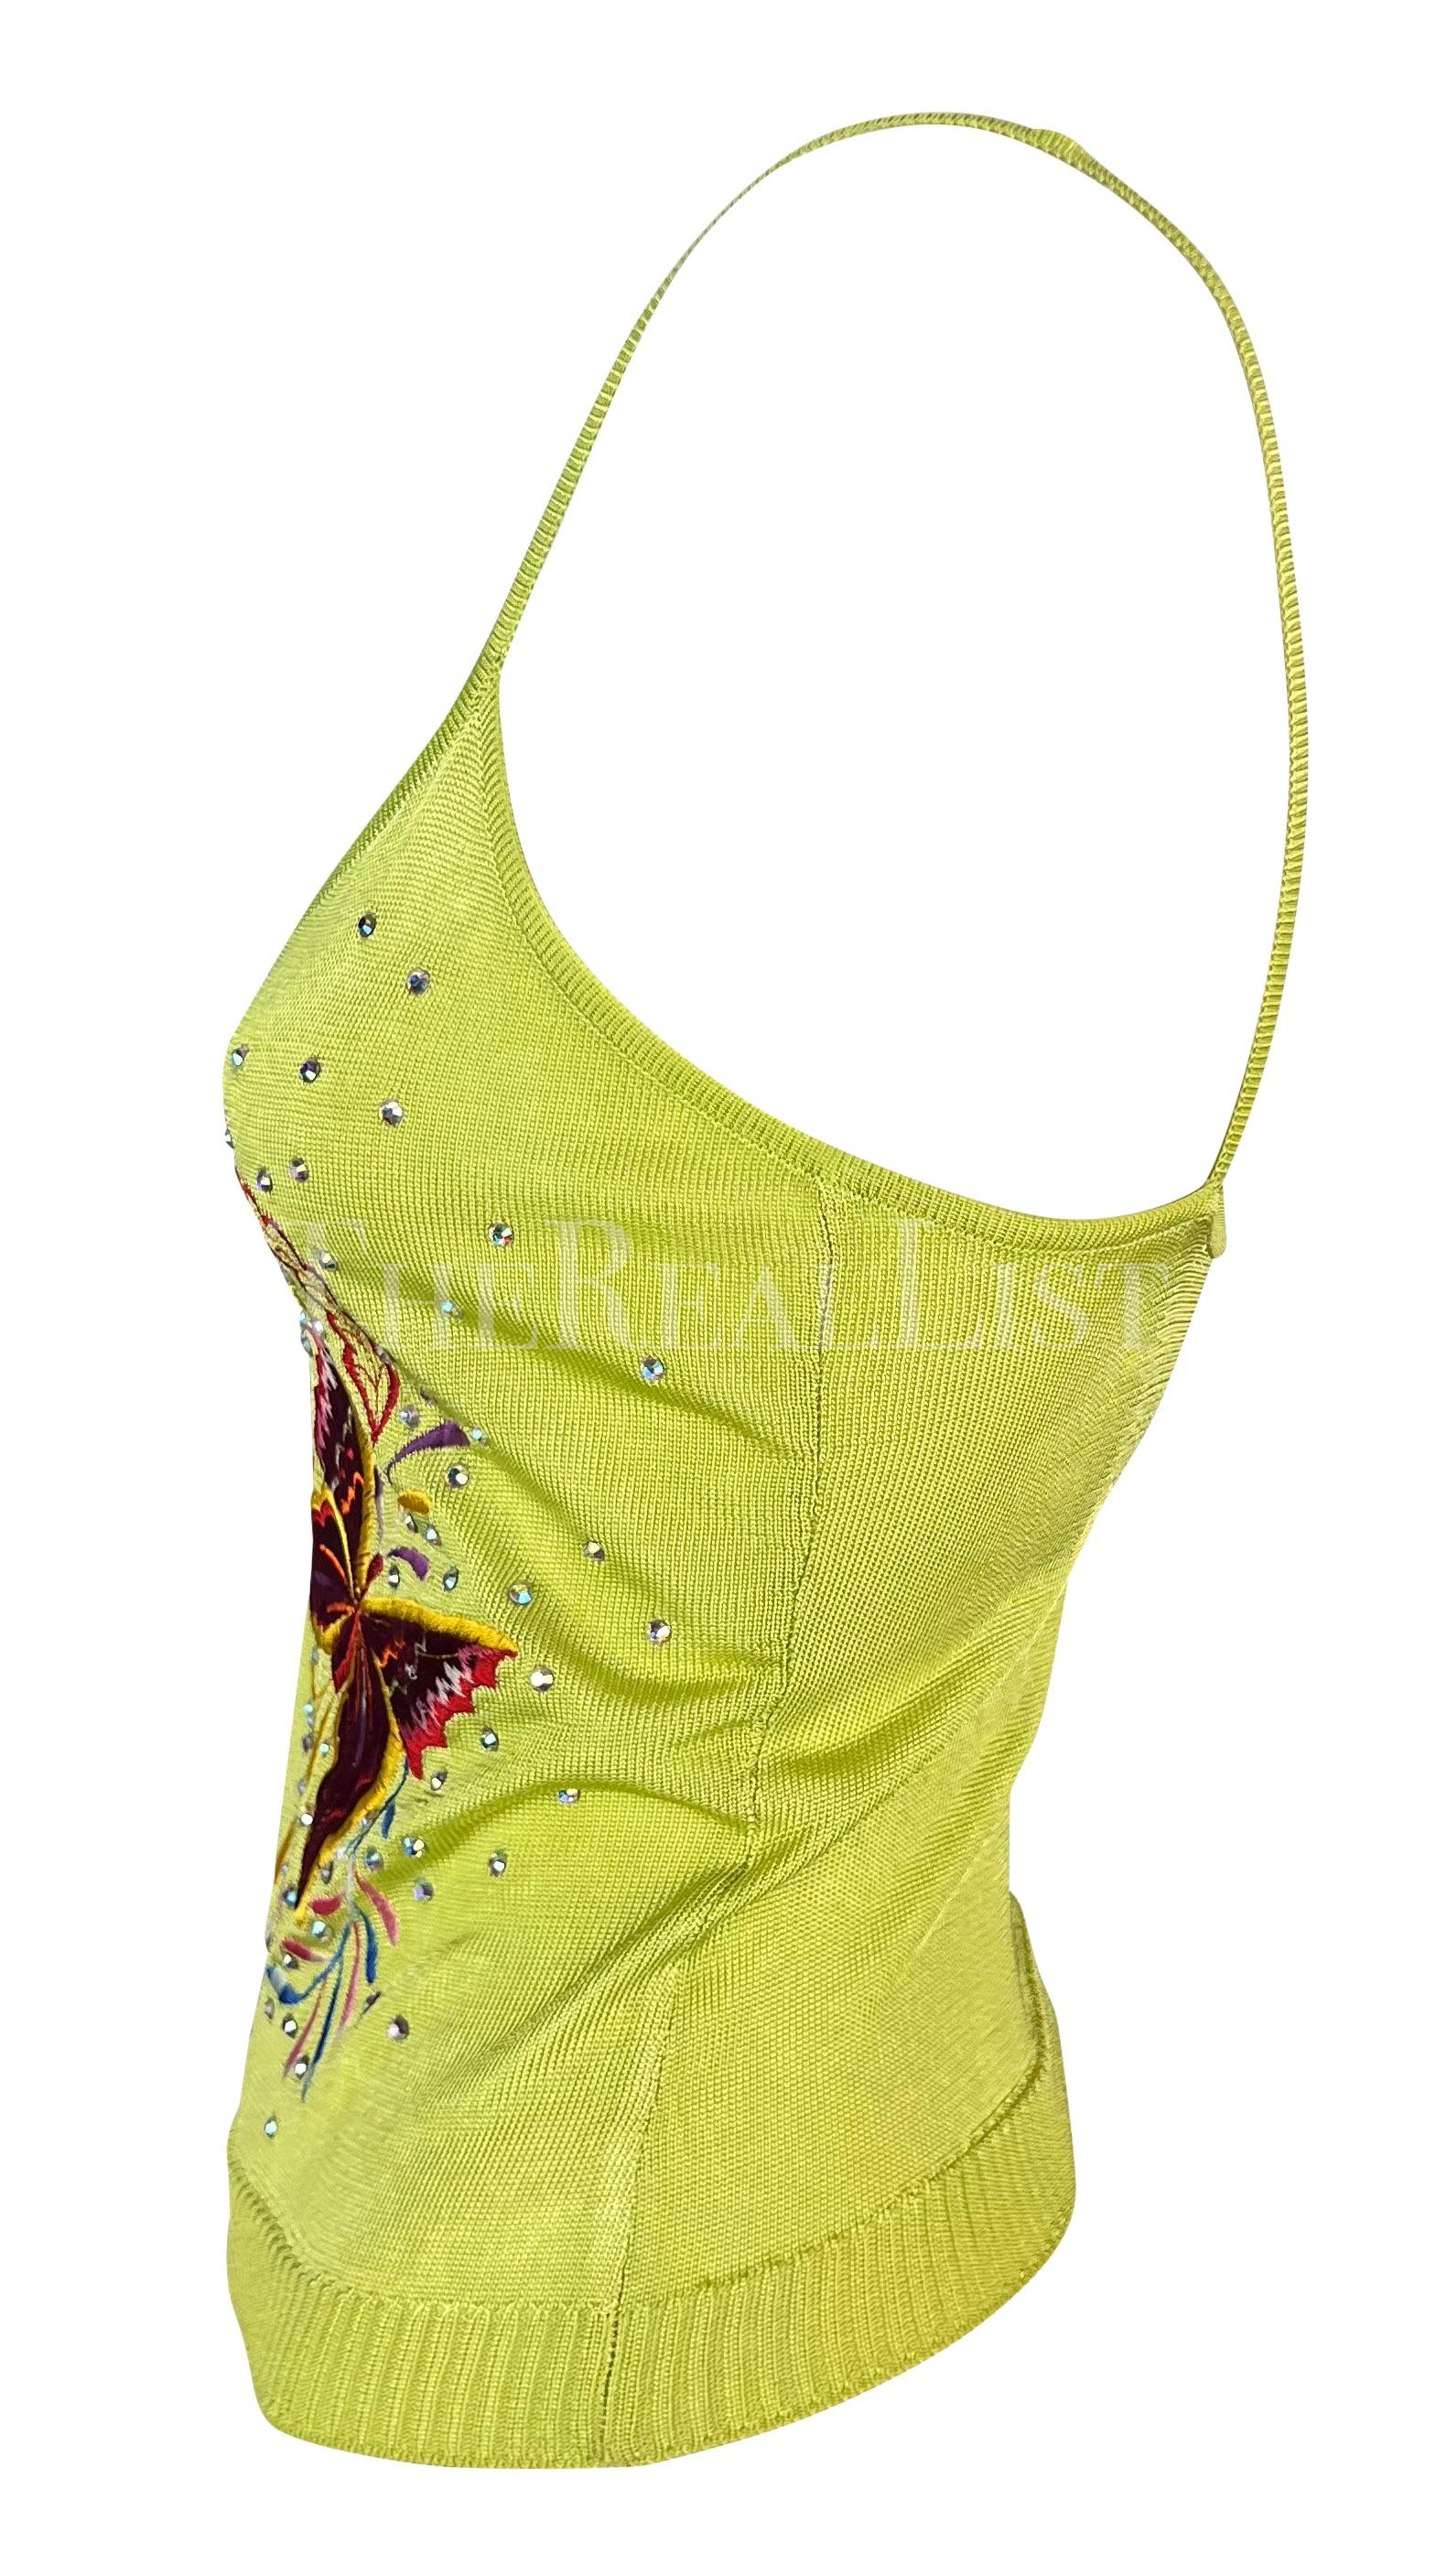 S/S 2002 Christian Dior by John Galliano Butterfly Embellished Knit Tank Top  4